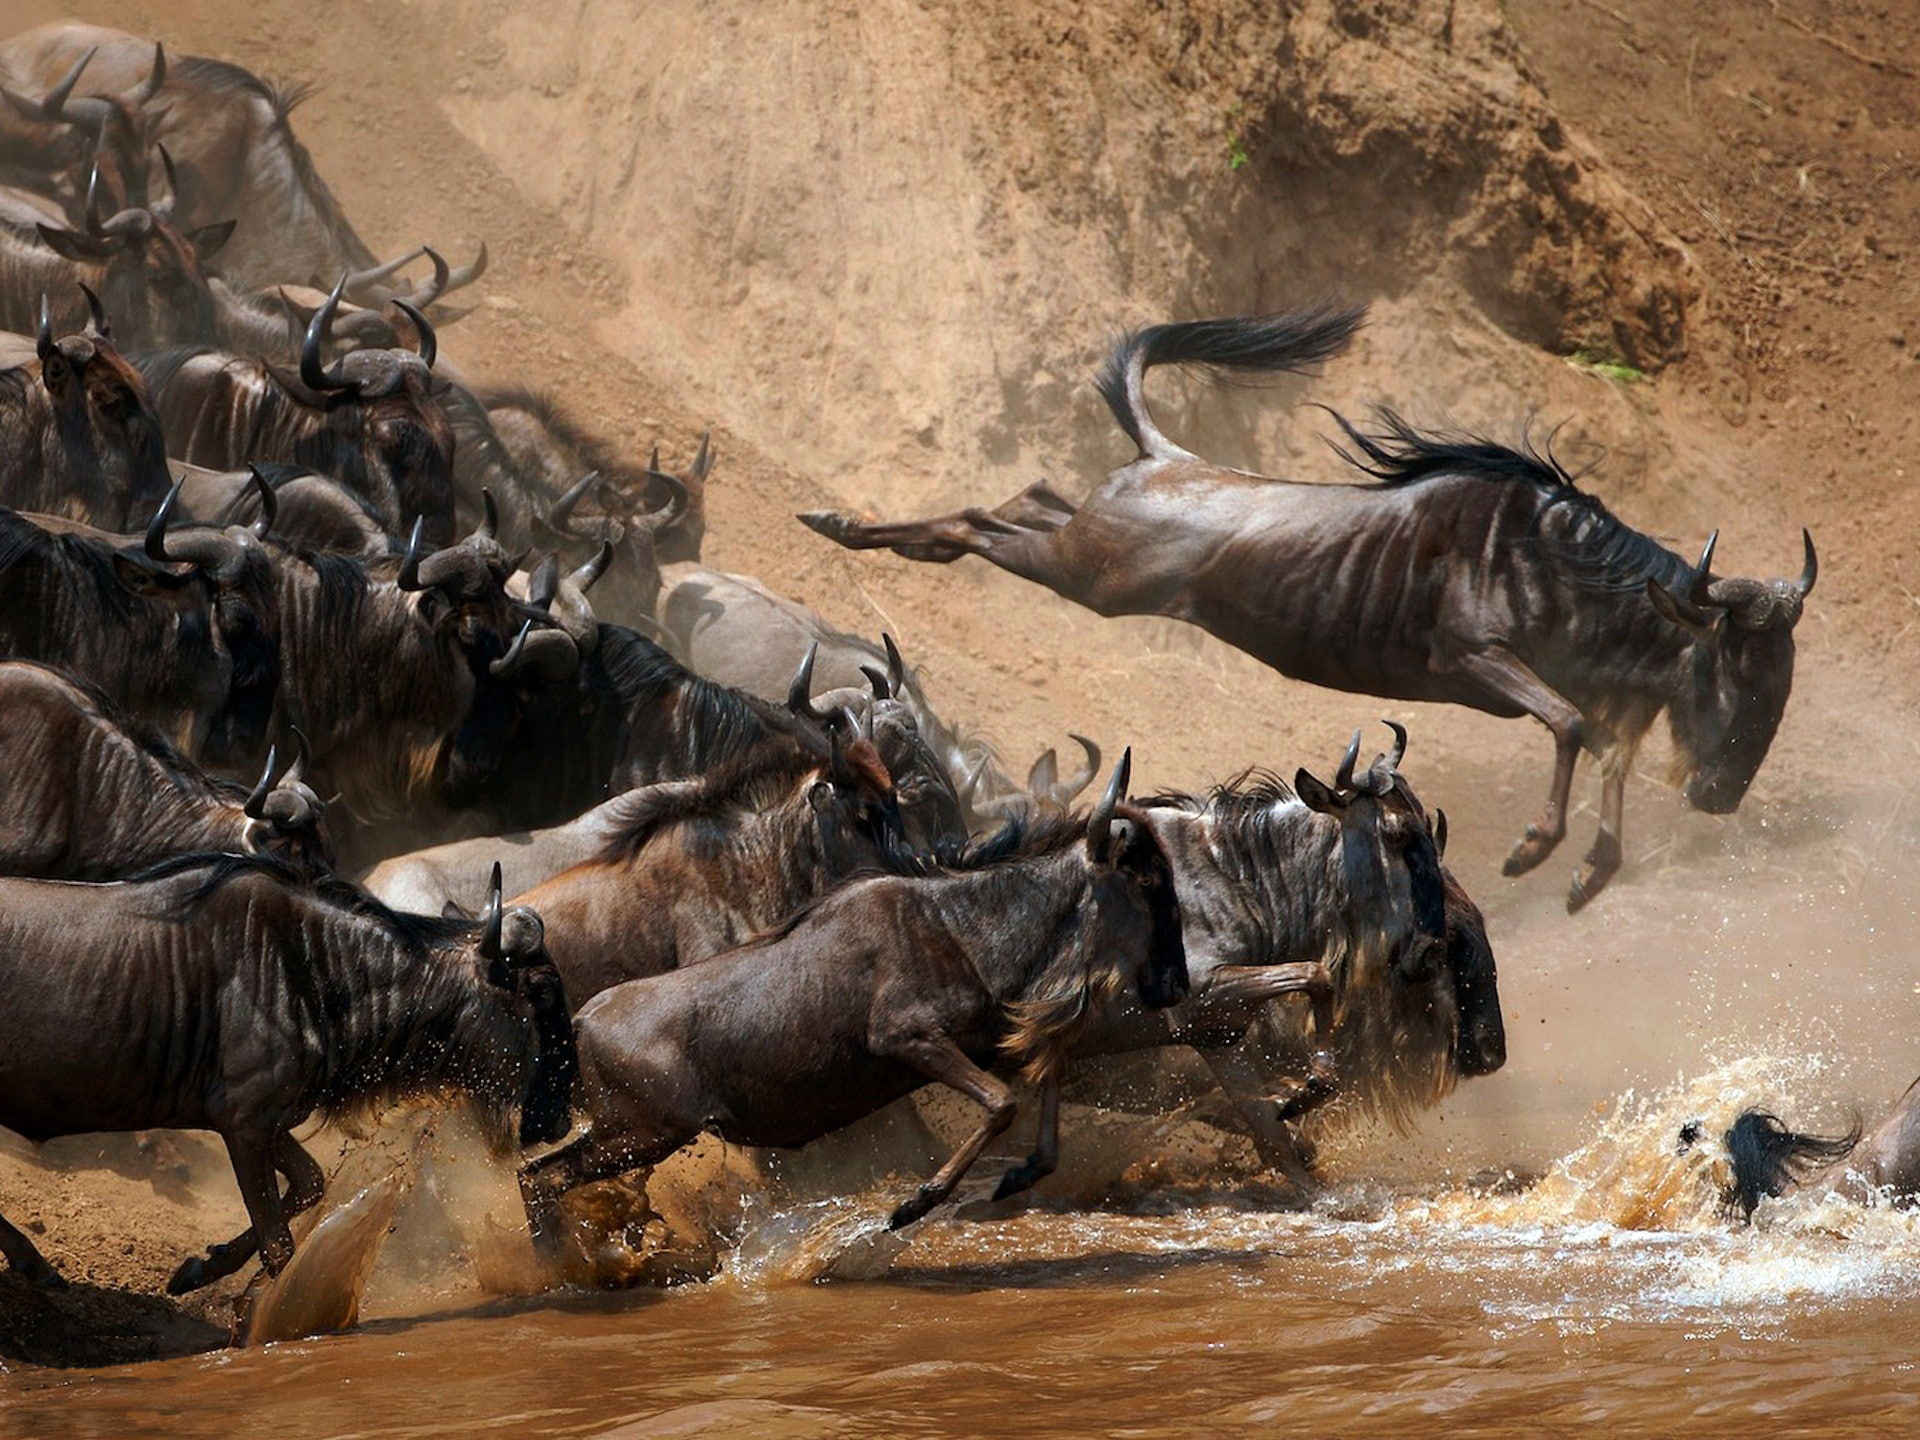 Africa, drops, rivers, Splash, Wildebeast, animal themes, group of animals